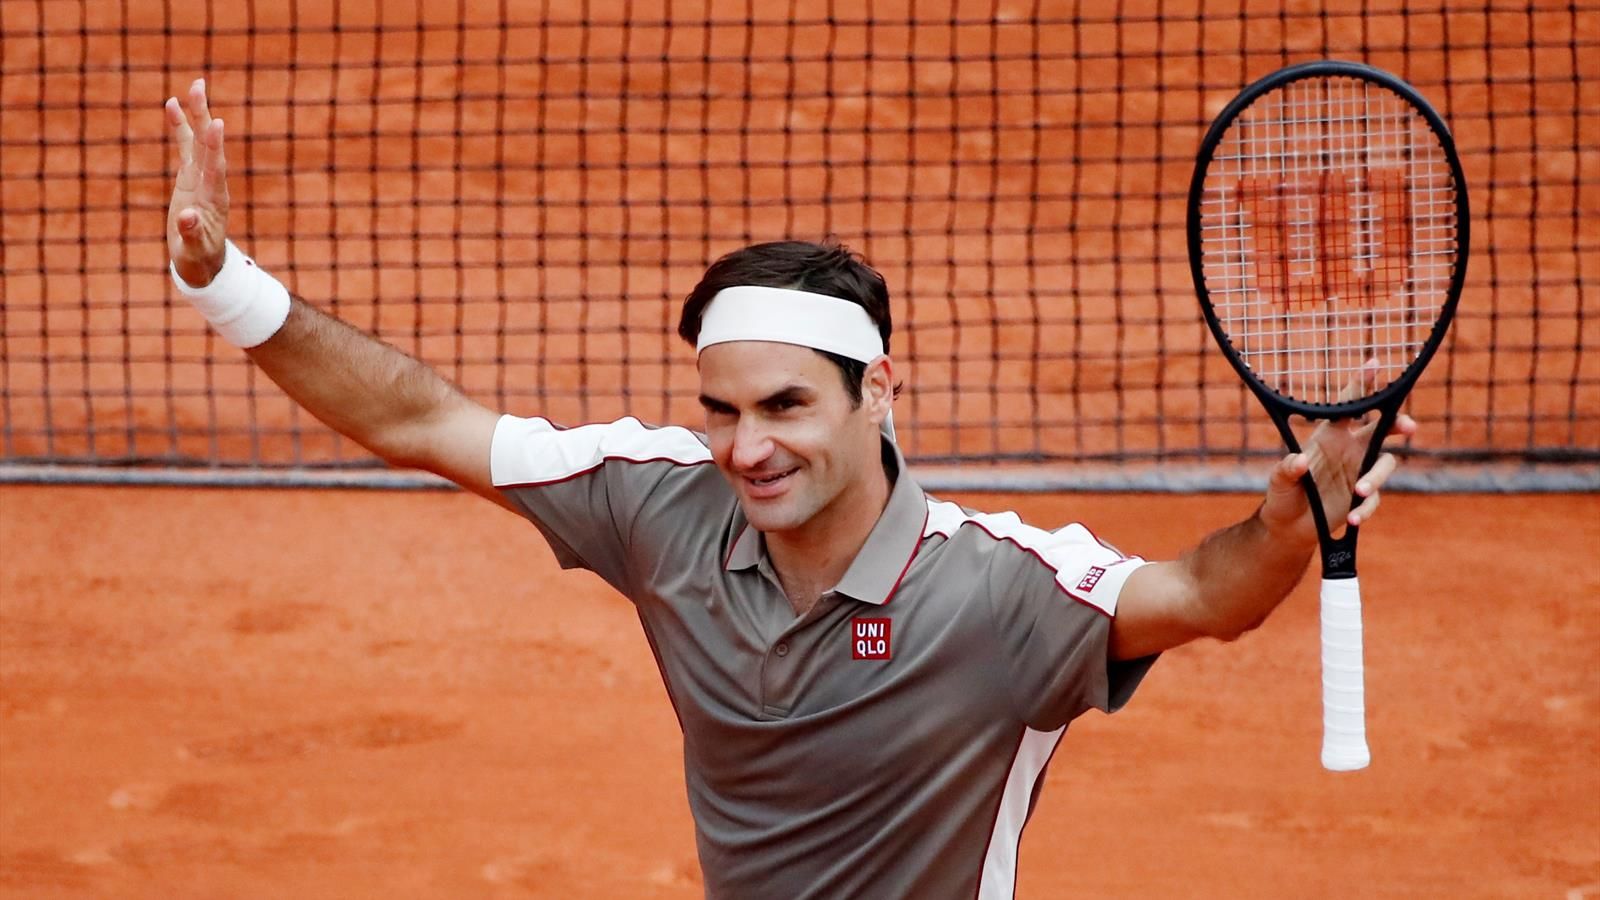 2019 French Open schedule and livestream